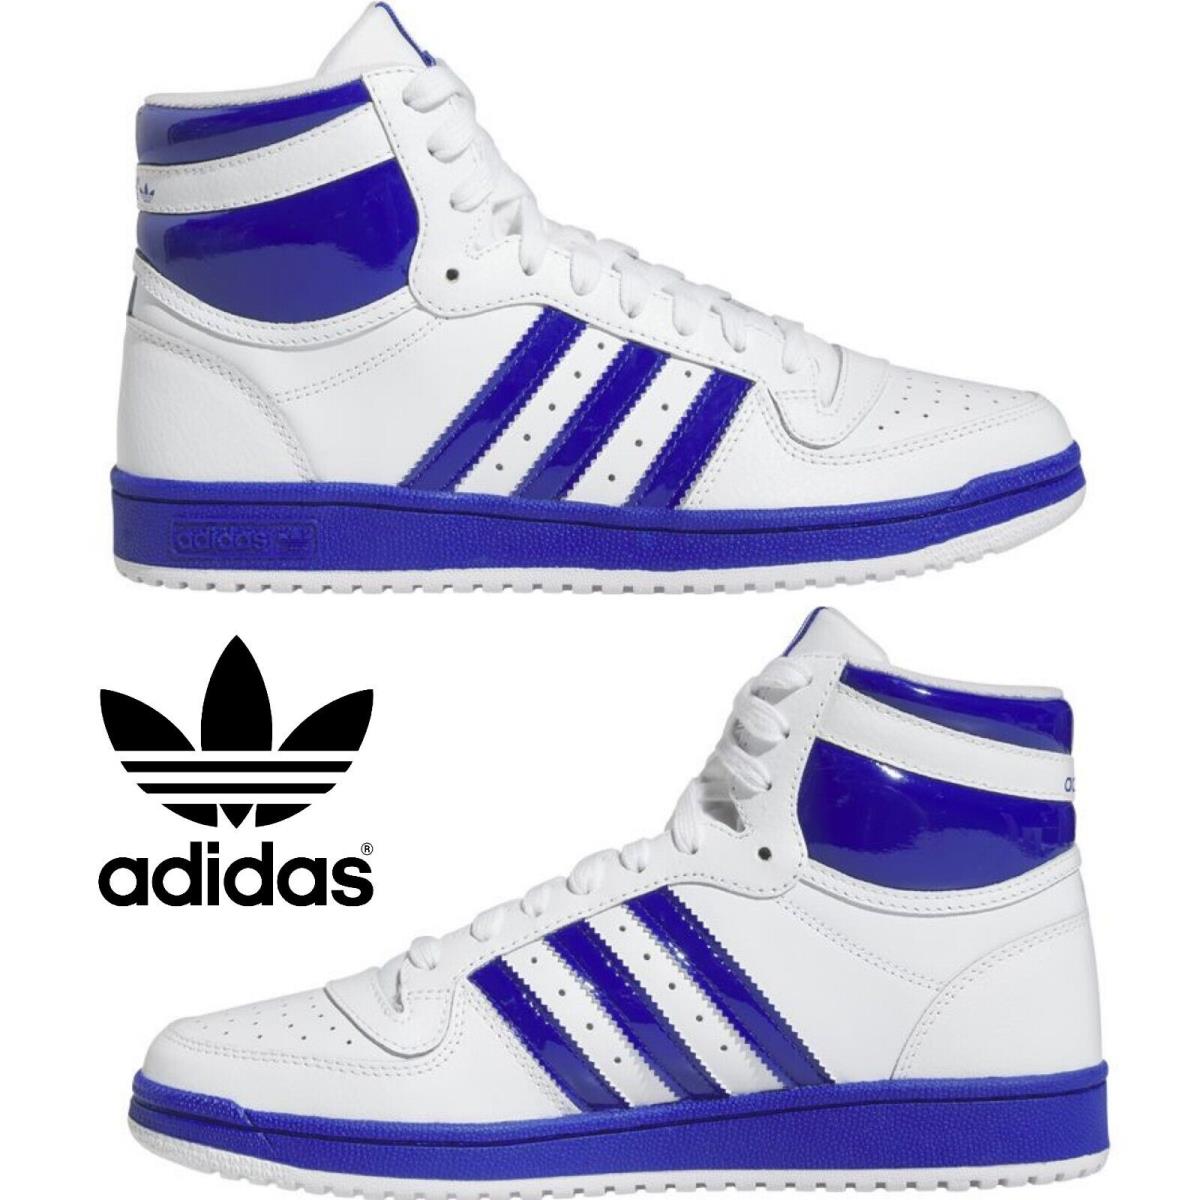 Adidas Originals Top Ten Men`s Sneakers Comfort Casual Shoes High Top White Blue - White, Manufacturer: White/Lucid Blue